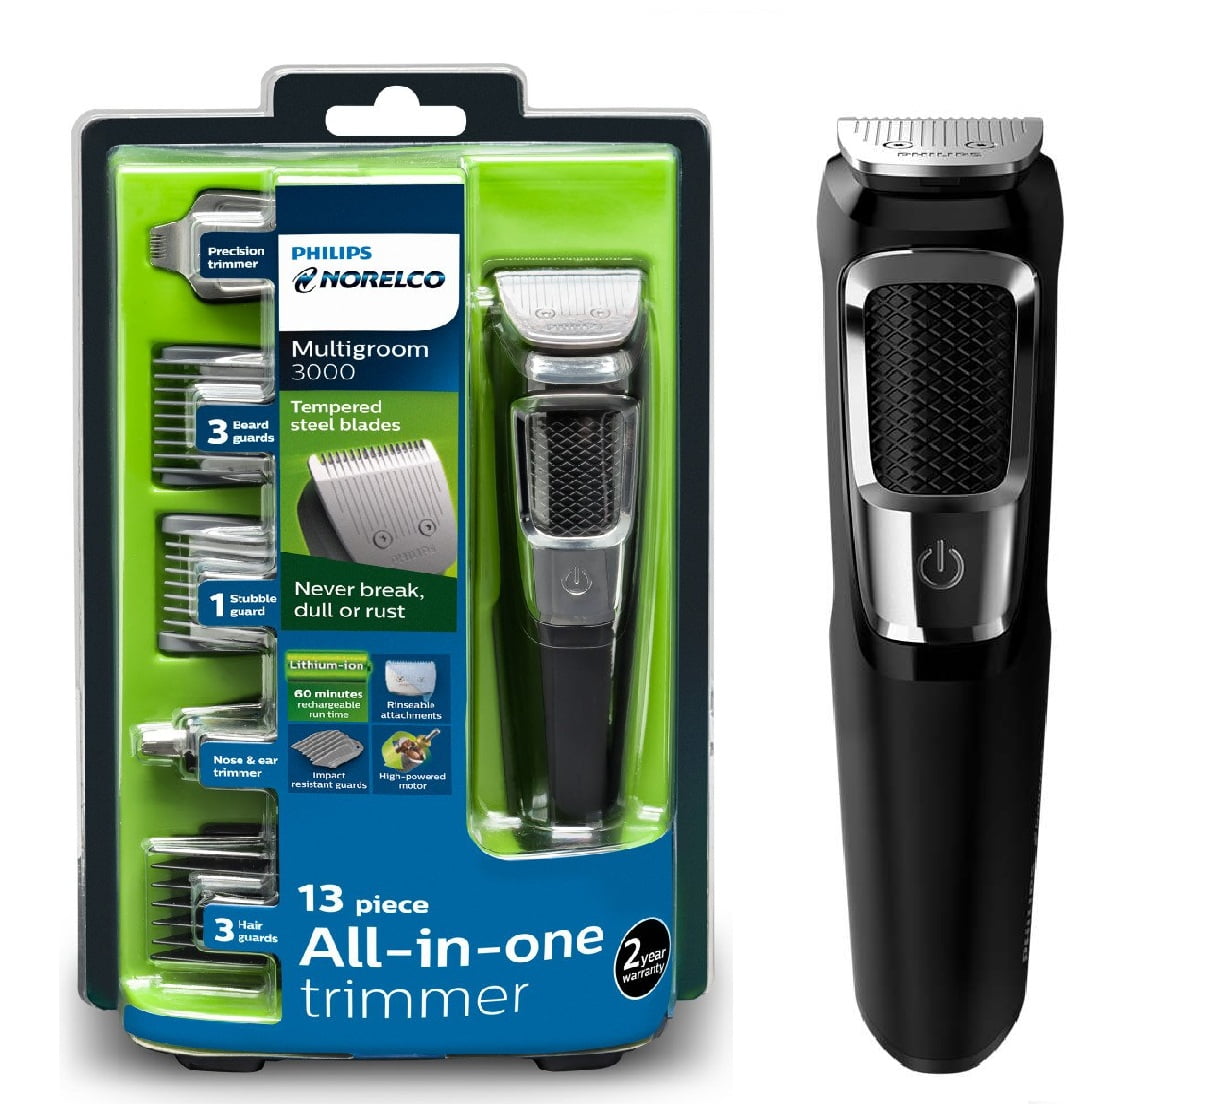 Philips Norelco Multigroom 3000, 13 Series attachment All-In-One MG3750 trimmer